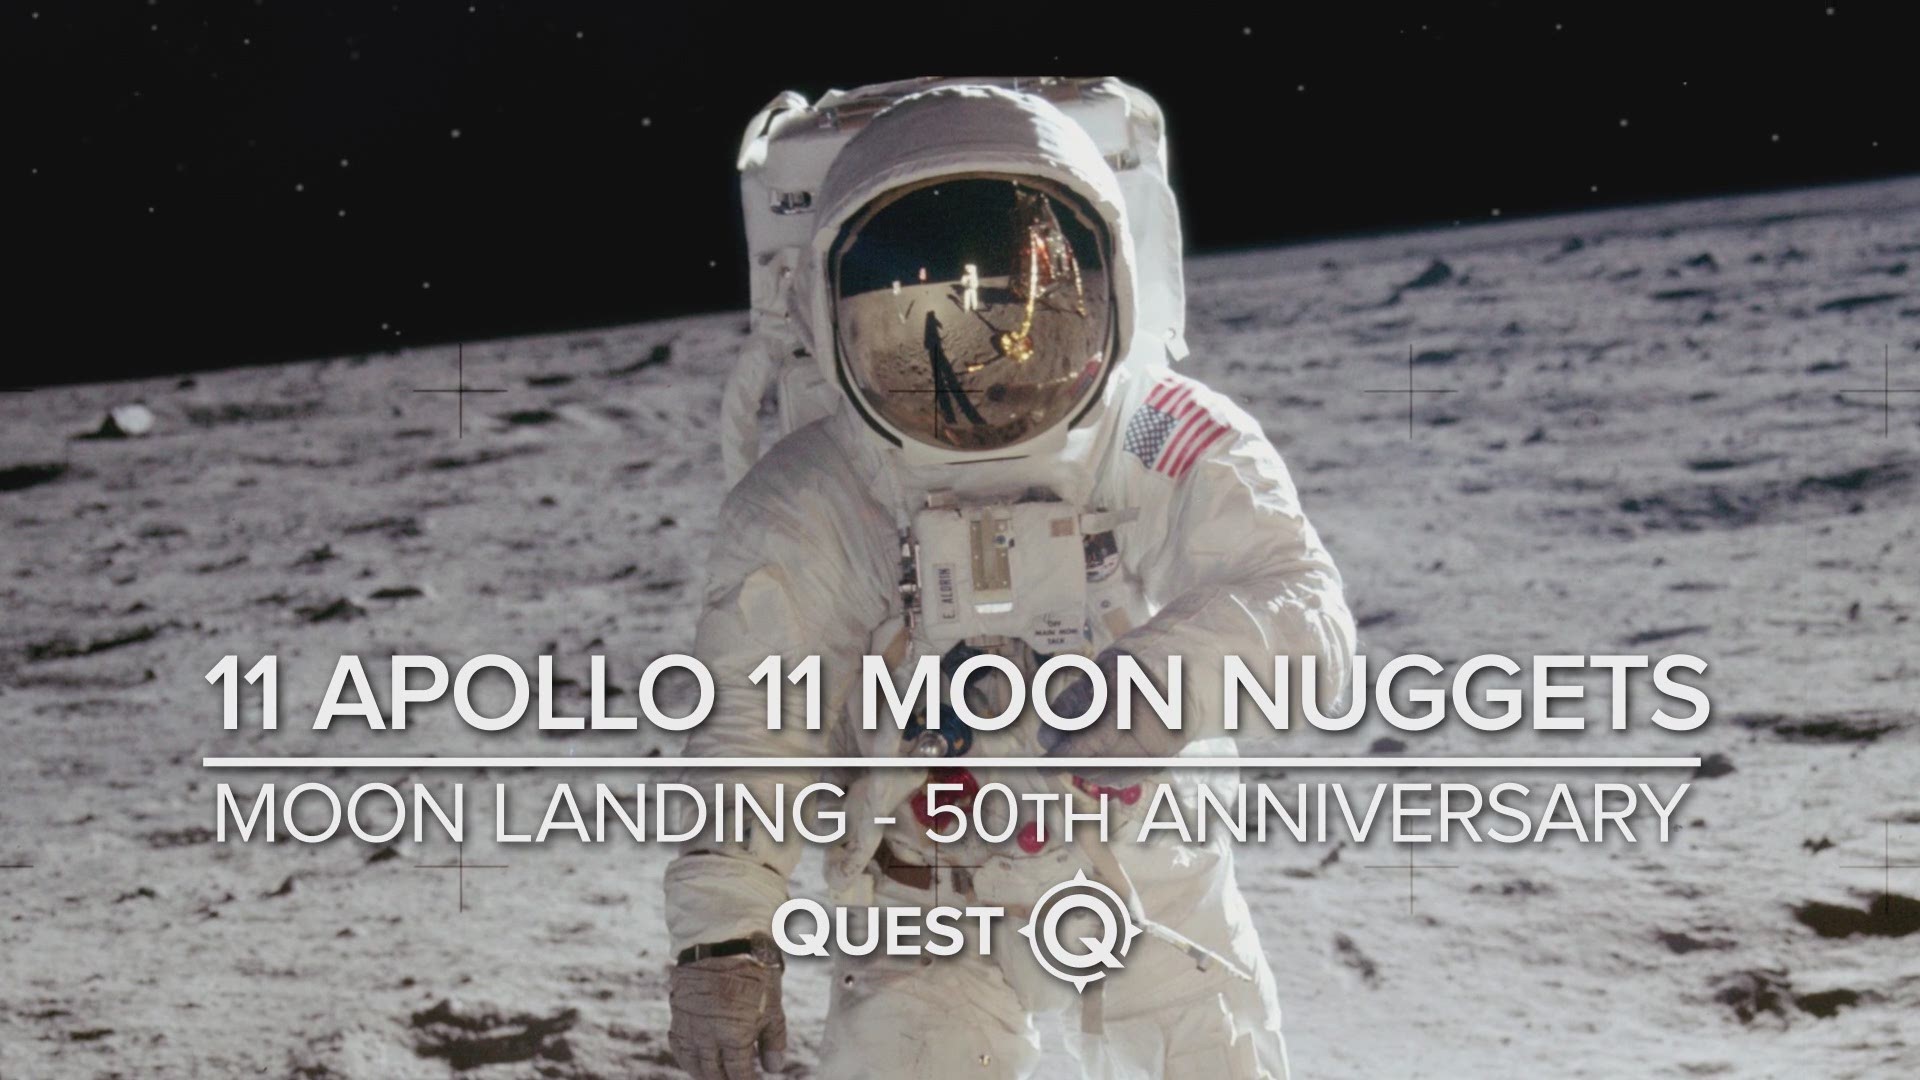 11 Apollo 11 moon landing nuggets you may not know from the Quest TV network.